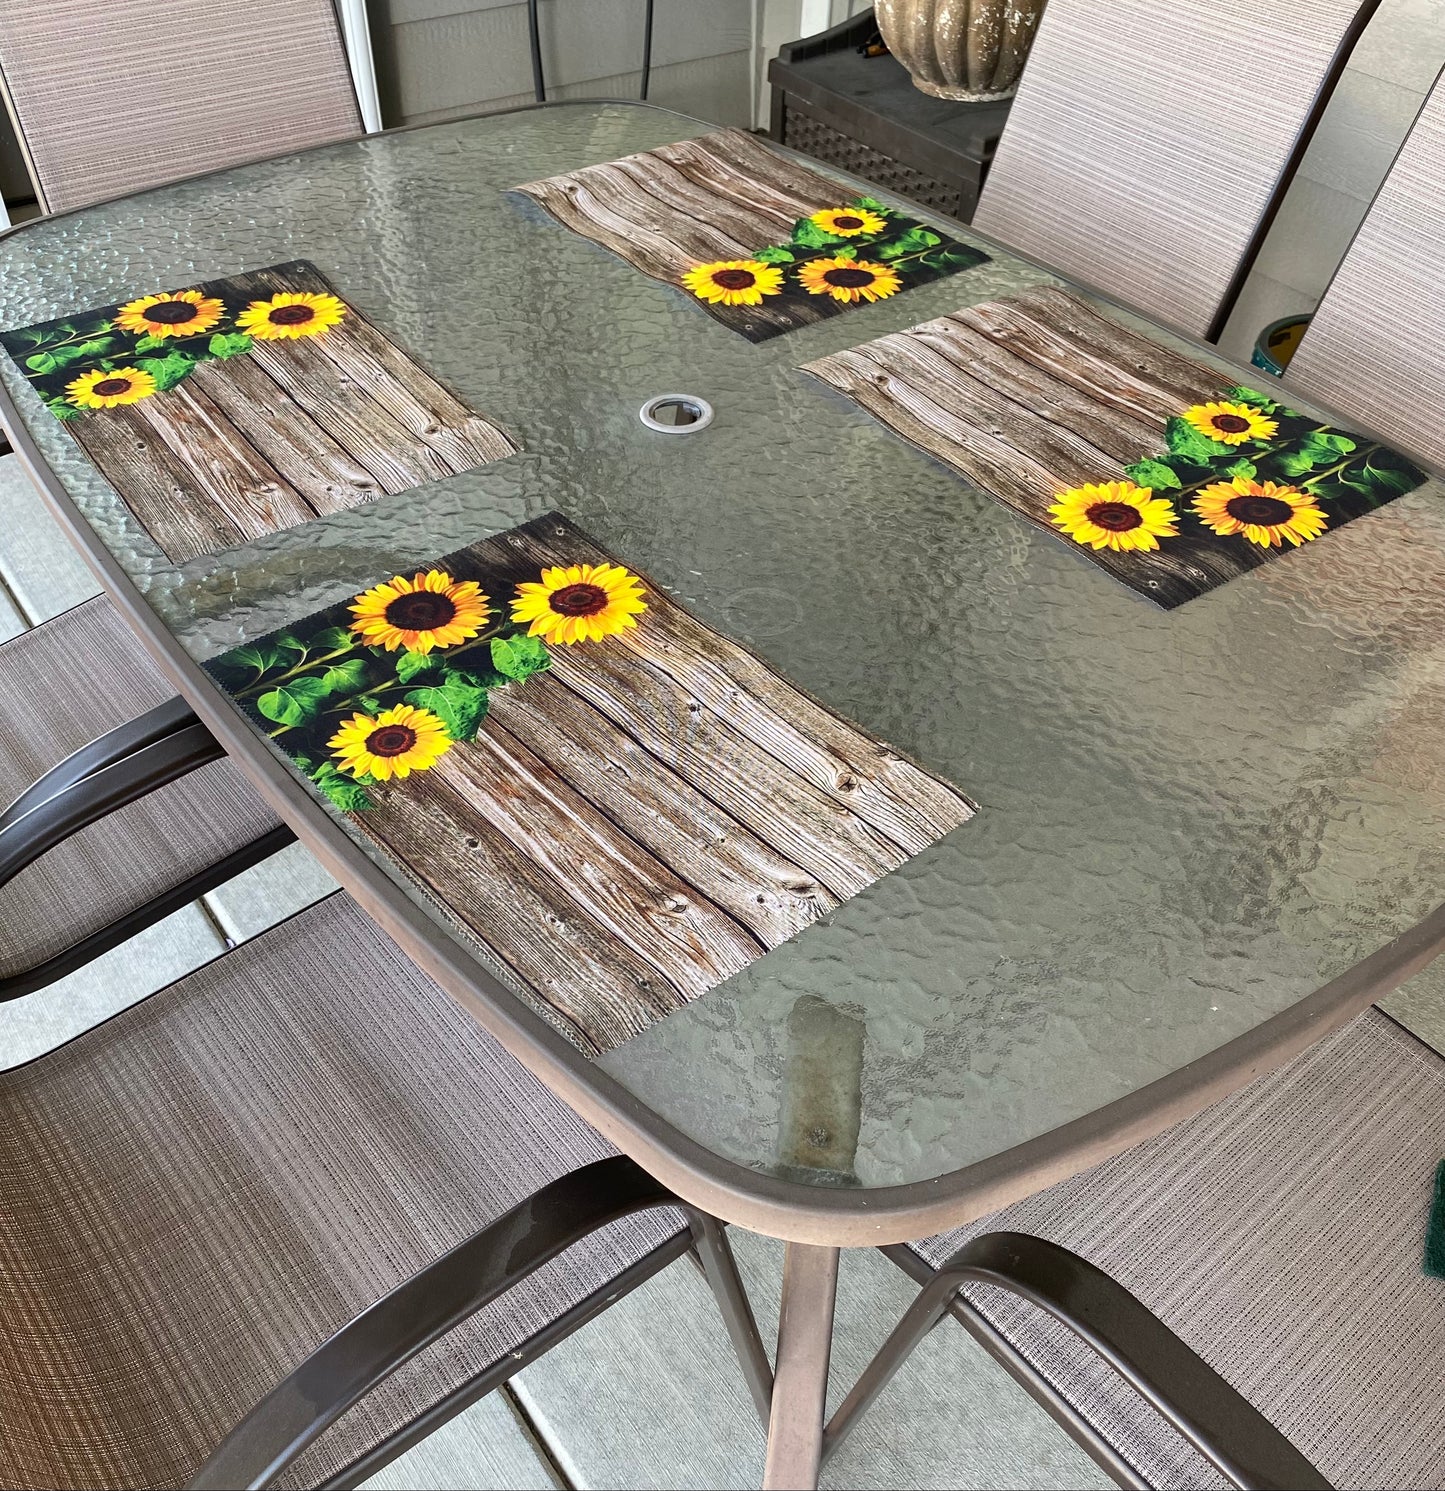 Set of 4 Sunflower Placemats